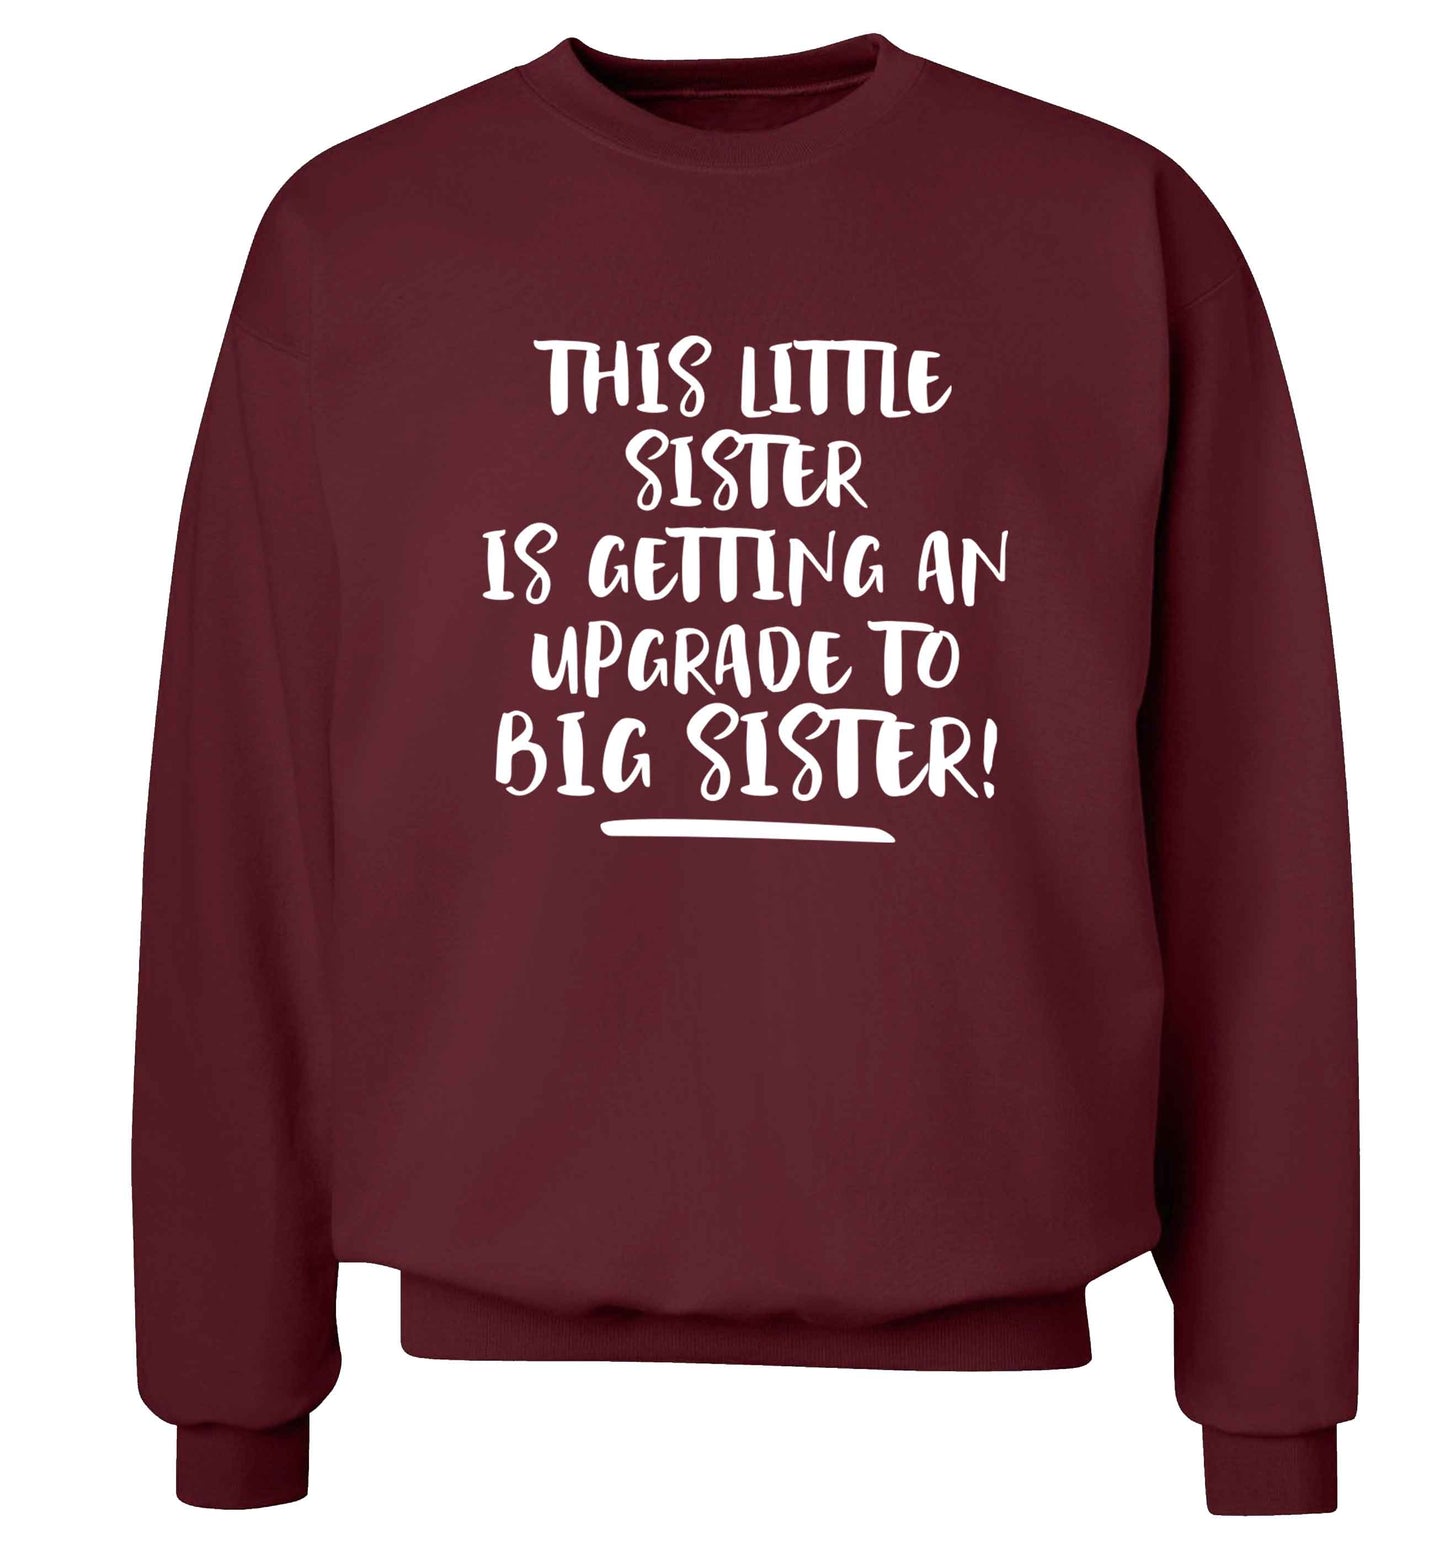 This little sister is getting an upgrade to big sister! Adult's unisex maroon Sweater 2XL